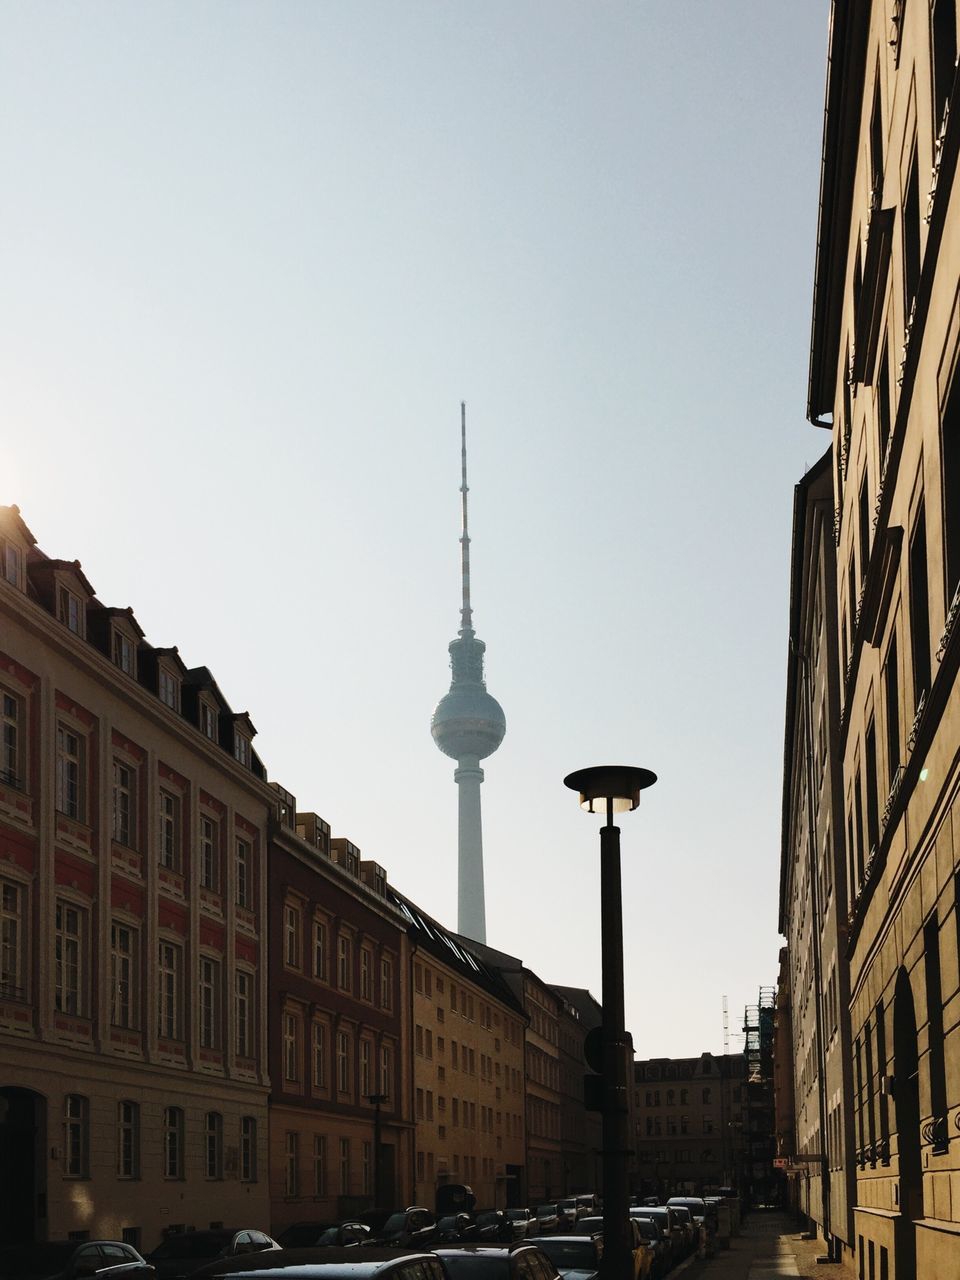 architecture, built structure, building exterior, city, tower, communications tower, famous place, international landmark, travel destinations, capital cities, clear sky, spire, tall - high, fernsehturm, travel, tourism, low angle view, culture, television tower, street light